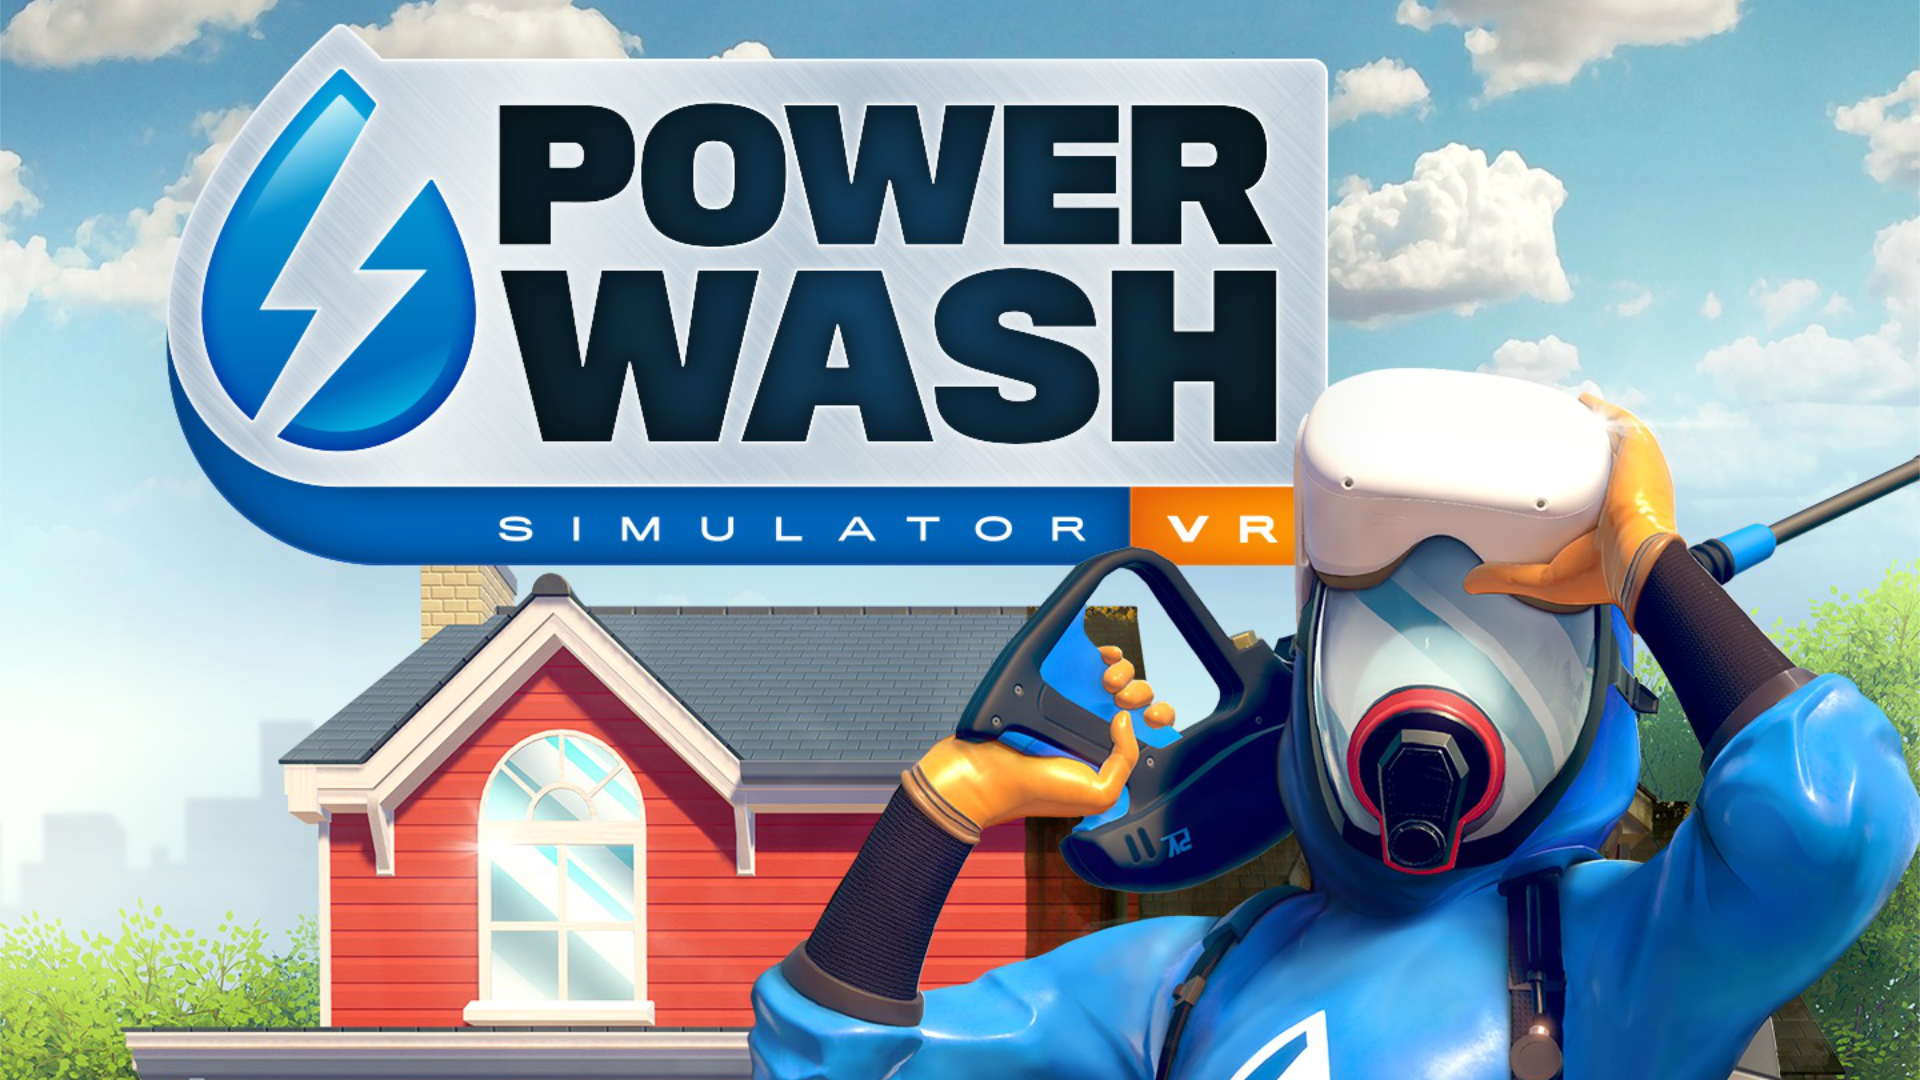 PowerWash Simulator is out now on #MetaQuest 2, 3 and pro